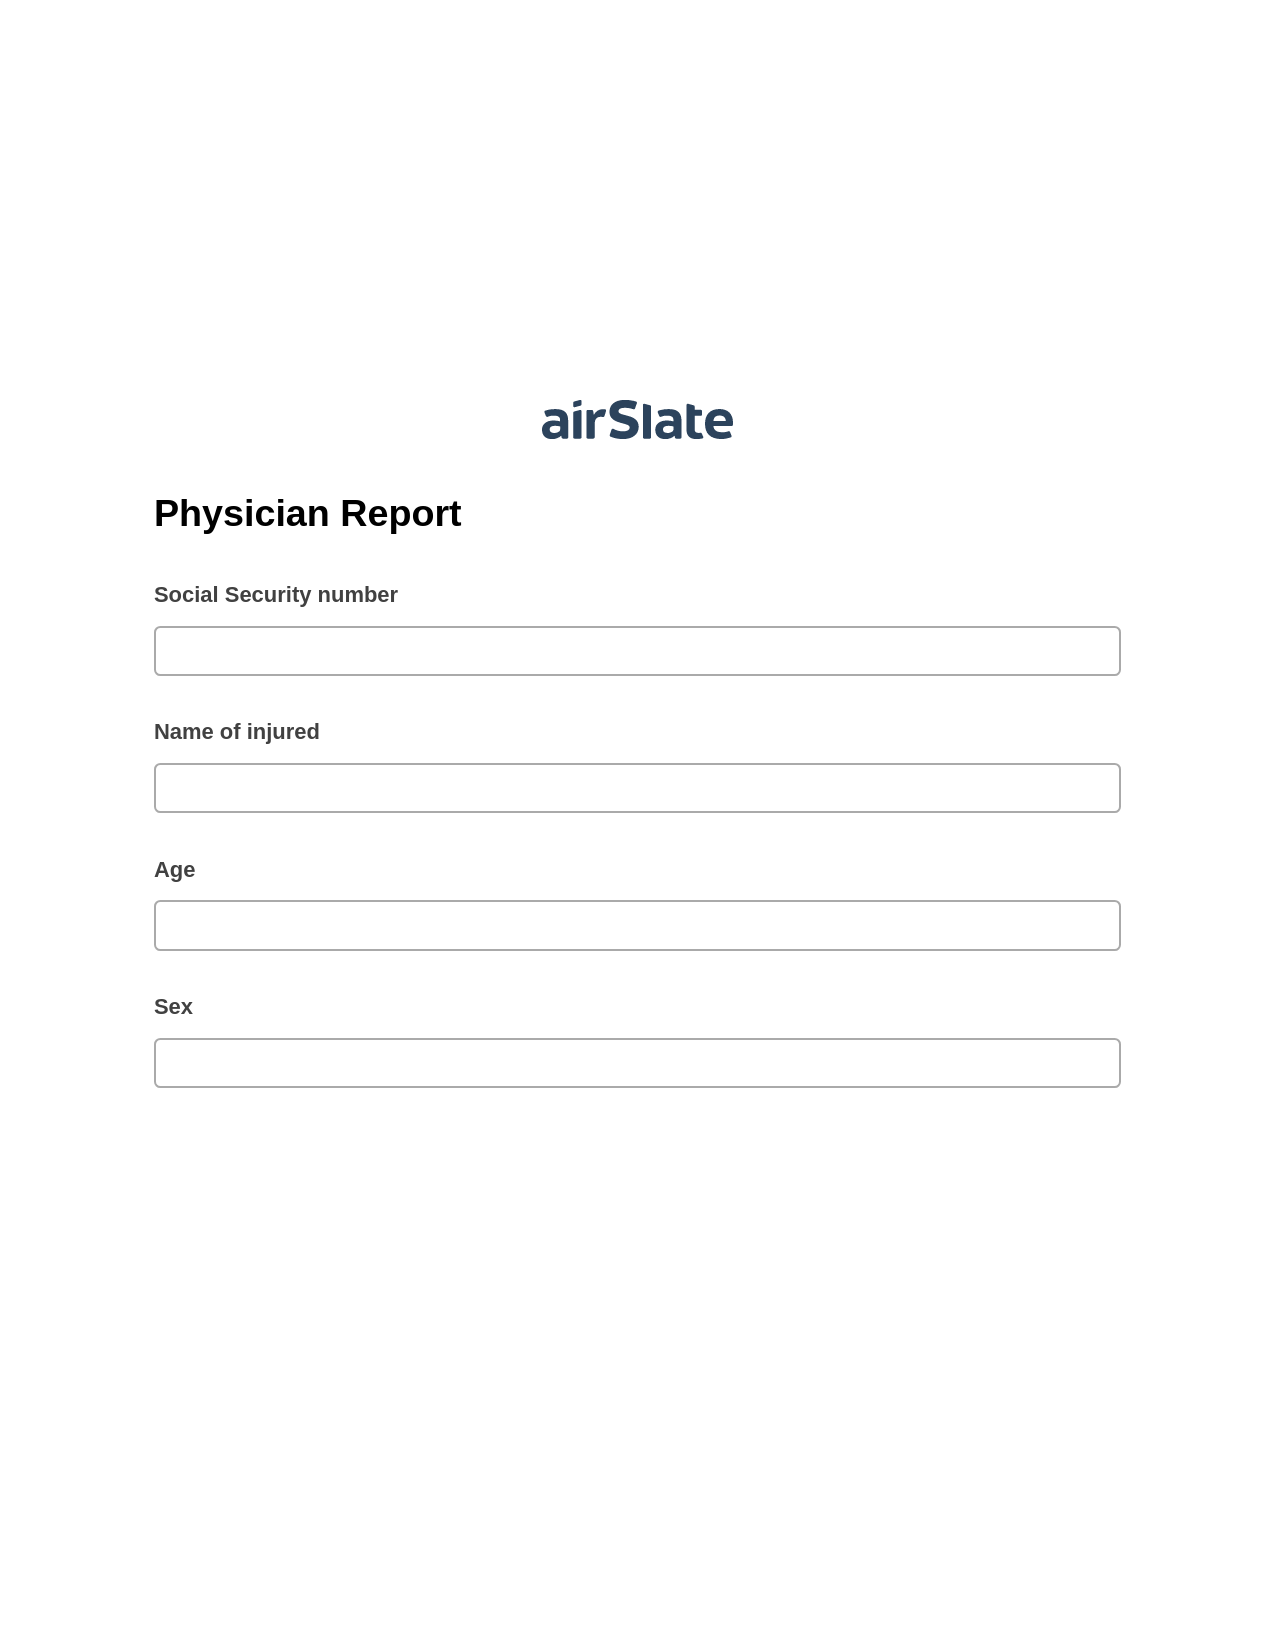 Multirole Physician Report Pre-fill from CSV File Bot, Create Salesforce Records Bot, Post-finish Document Bot